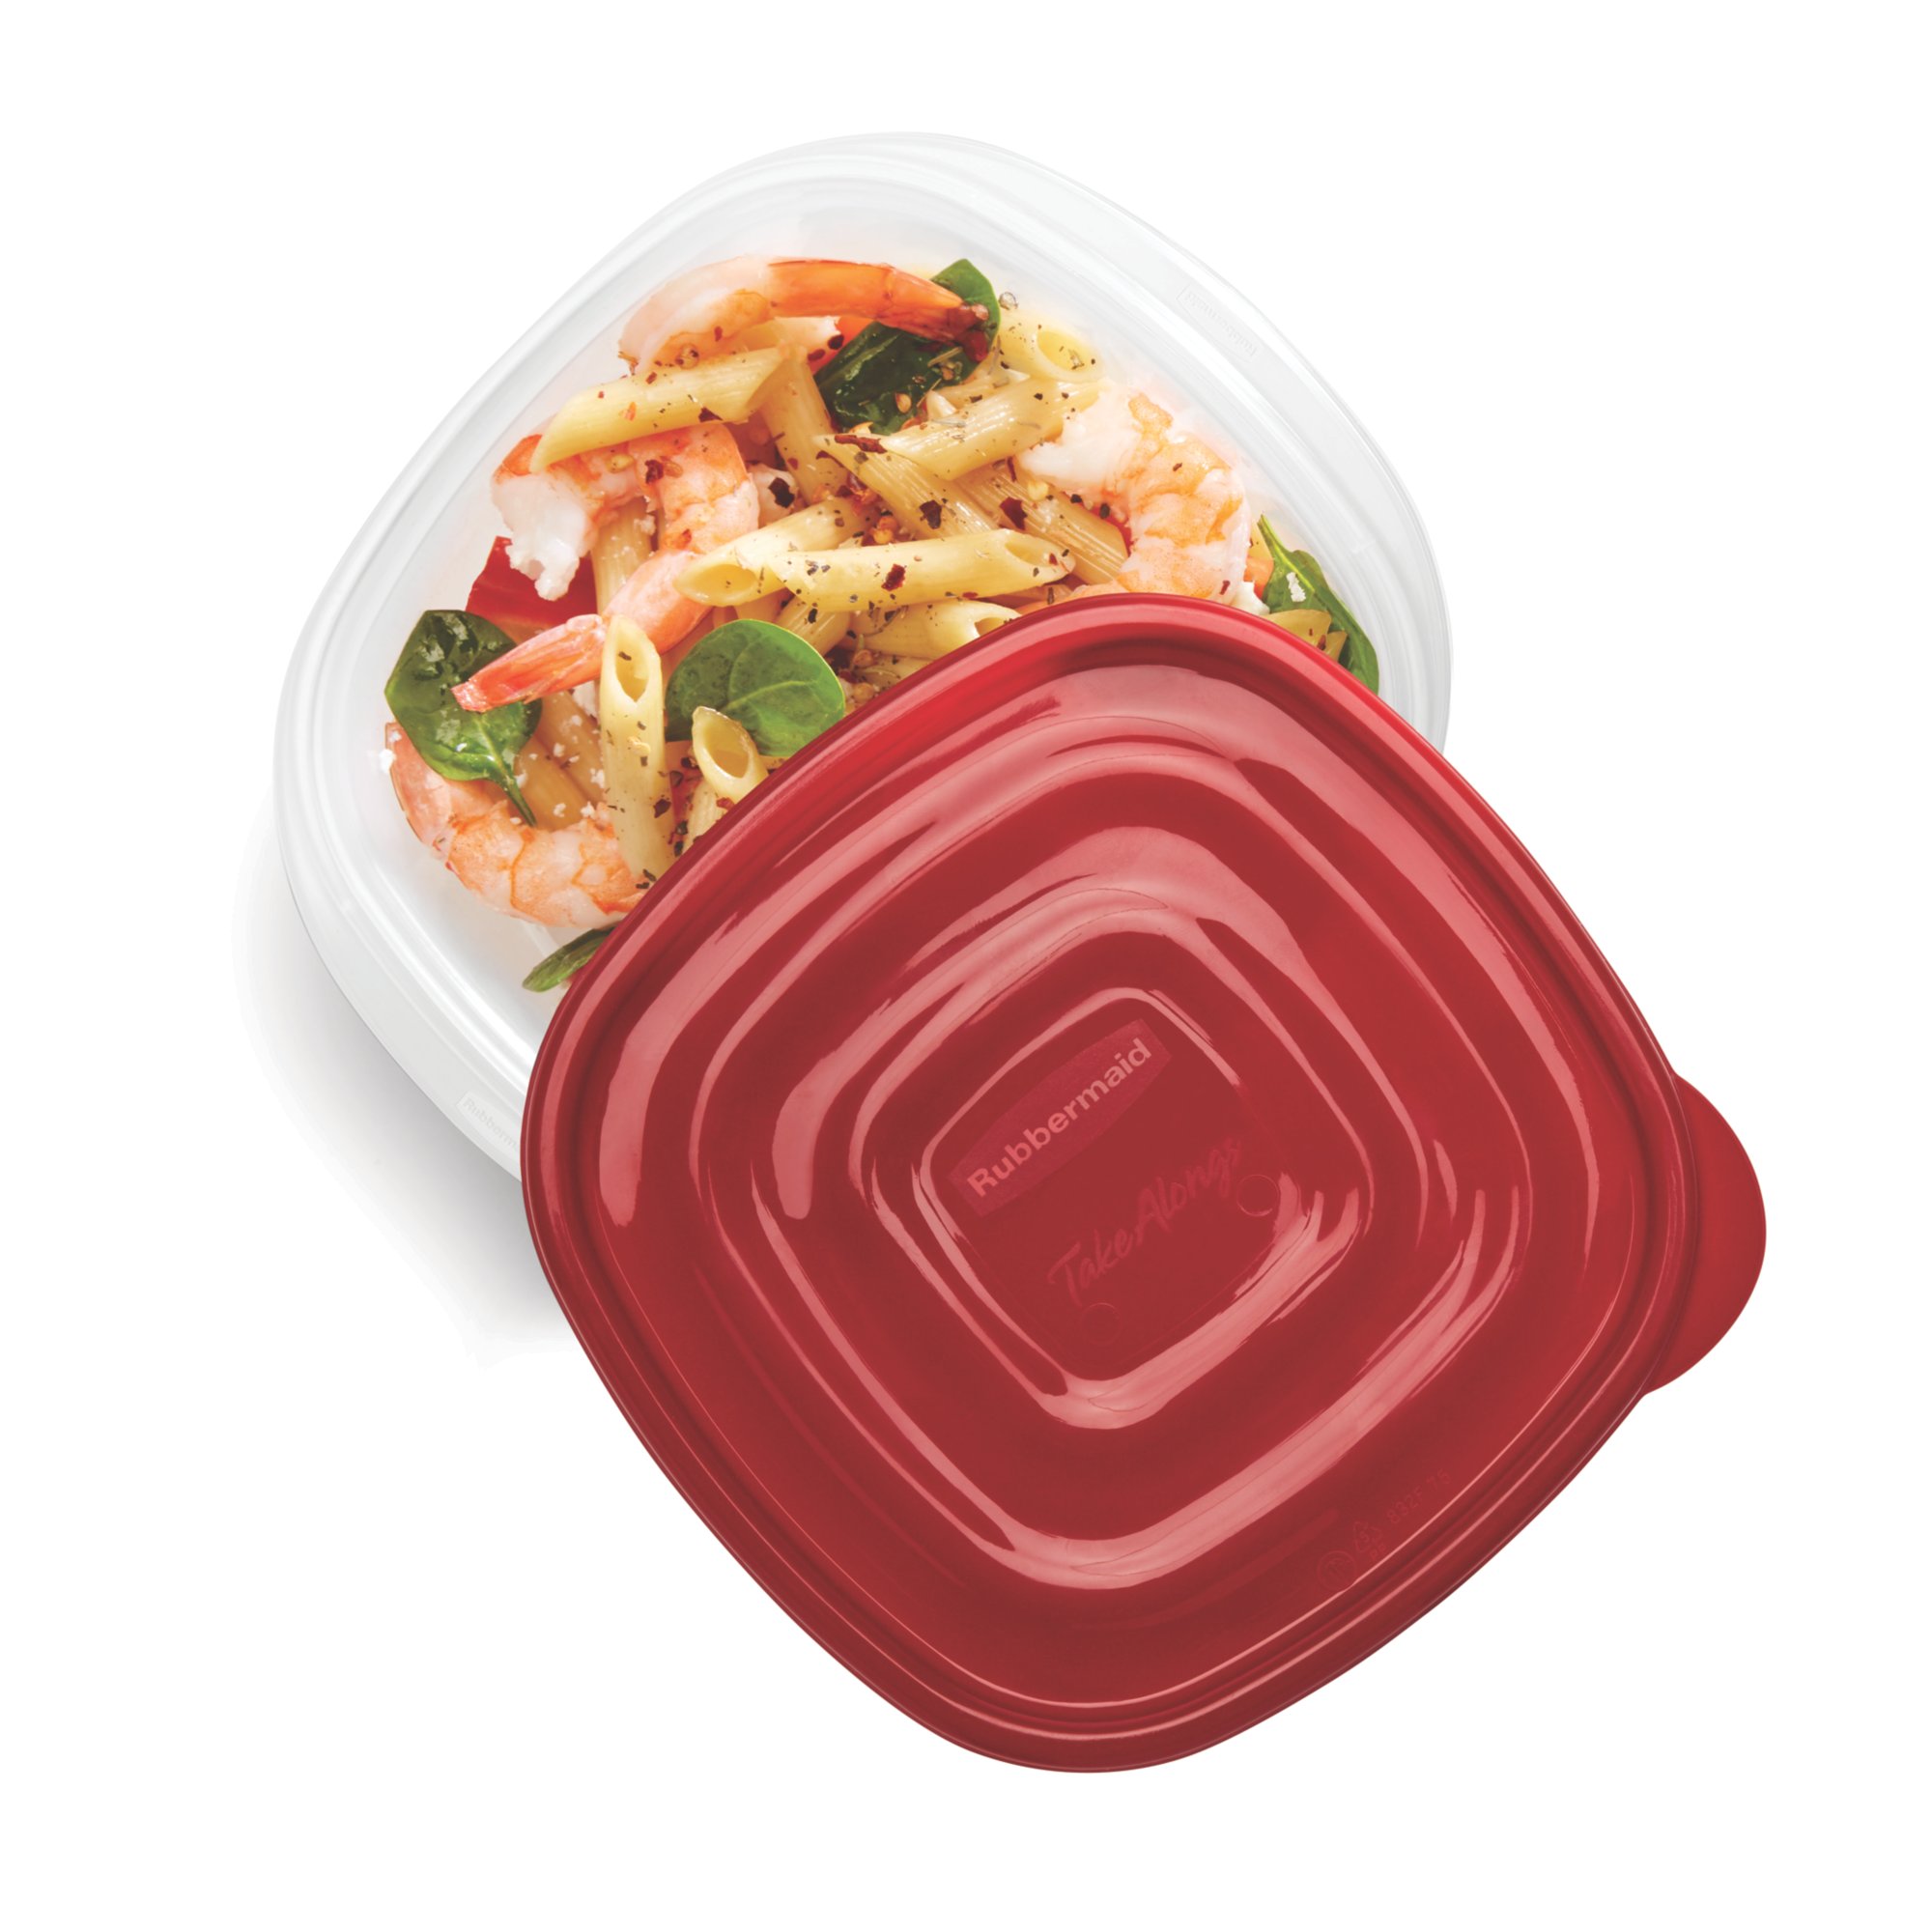 https://s7d9.scene7.com/is/image/NewellRubbermaid/SAP-rubbermaid-food-storage-takealongs-deep-square-lid-and-container-with-lid-5.2cup-2pc-overhead-1?wid=2000&hei=2000